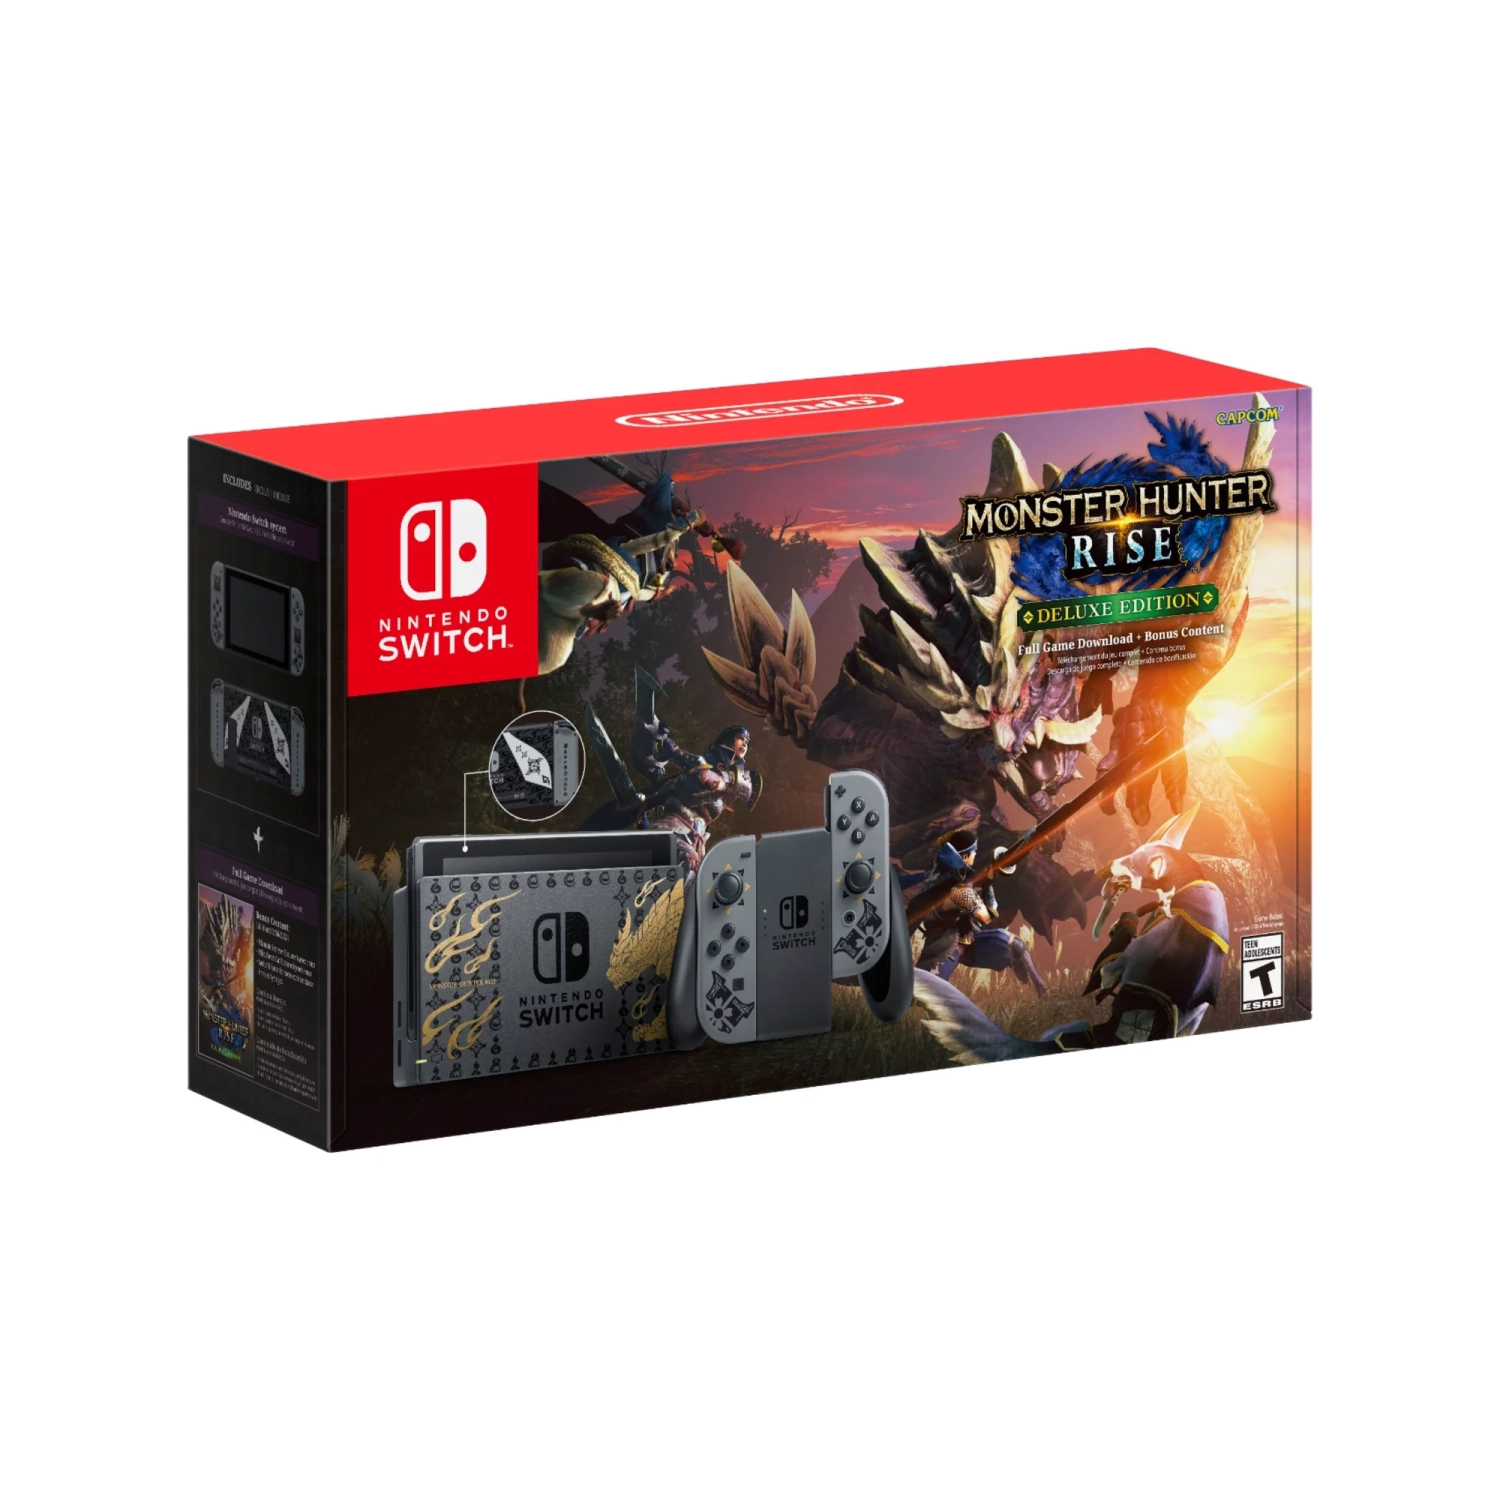 Nintendo Switch Monster Hunter Rise Deluxe Edition System with Pro Controller